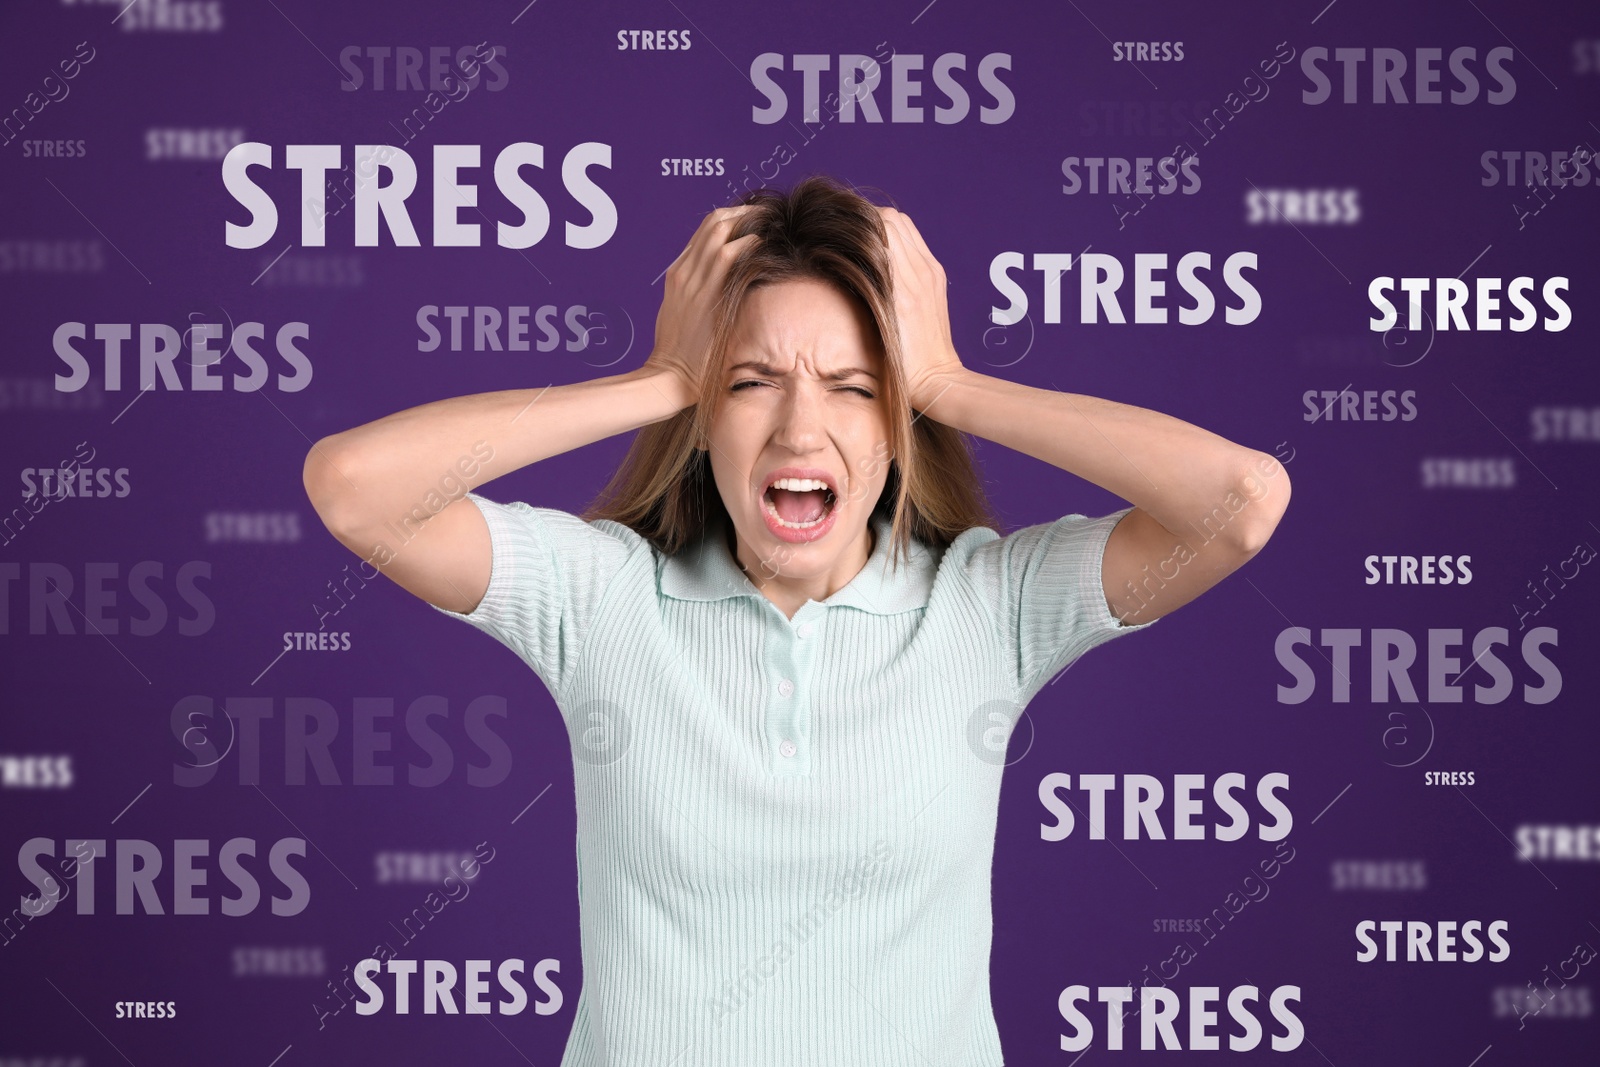 Image of Stressed young woman and text on violet background